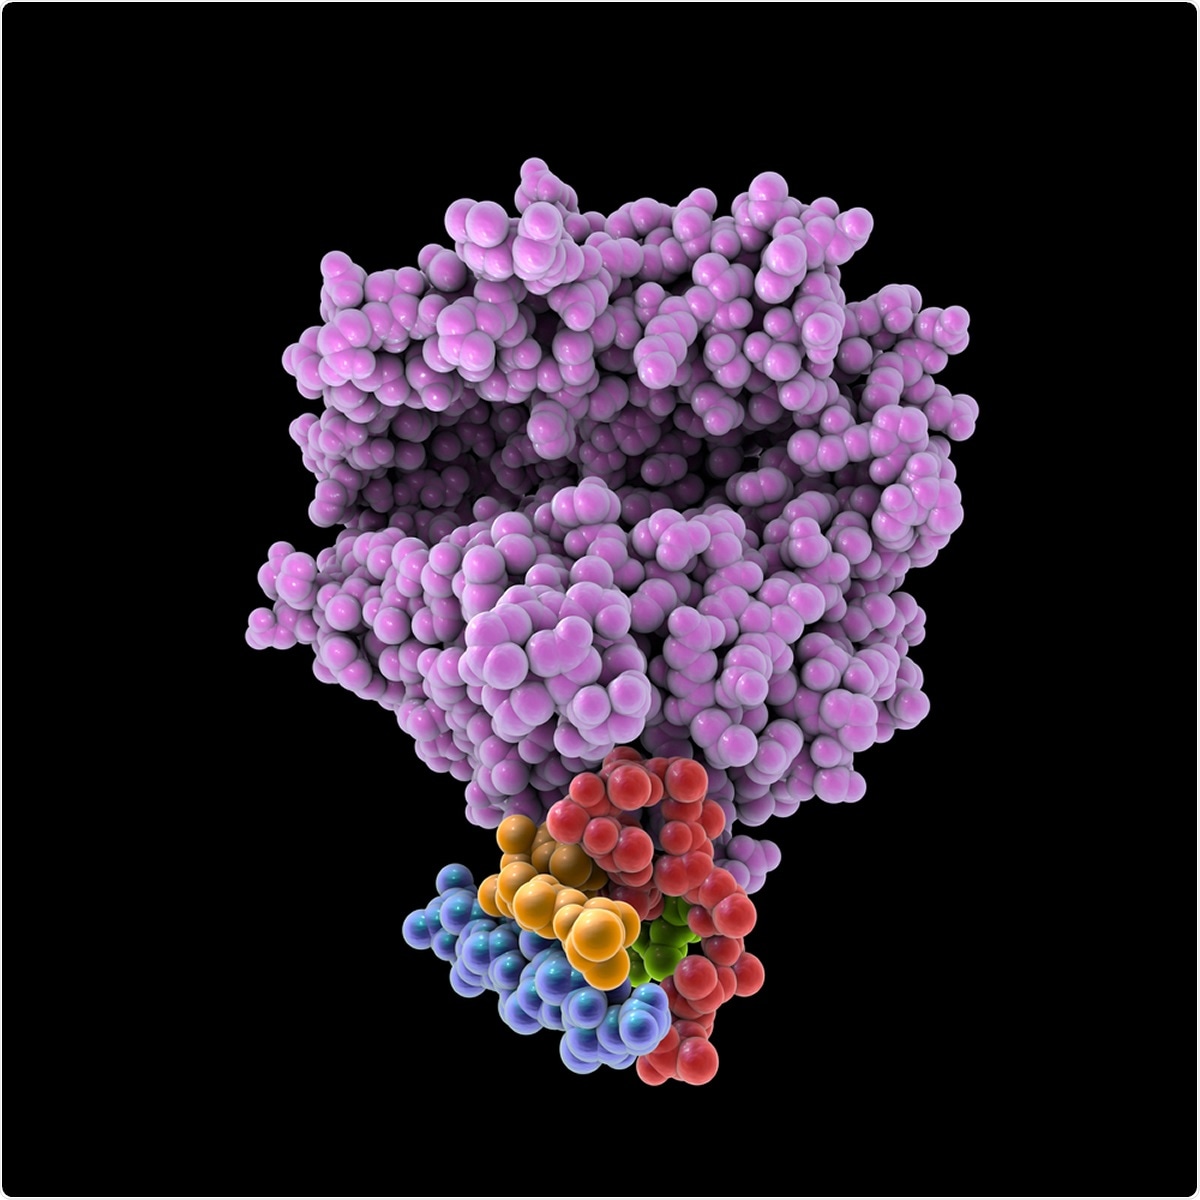 Human ACE2 receptor, 3D illustration. Angiotensin Converting Enzyme-Related Carboxypeptidase, a membrane protein which is used by SARS-CoV-2 virus to enter the human cells. Image Credit: Kateryna Kon / Shutterstock